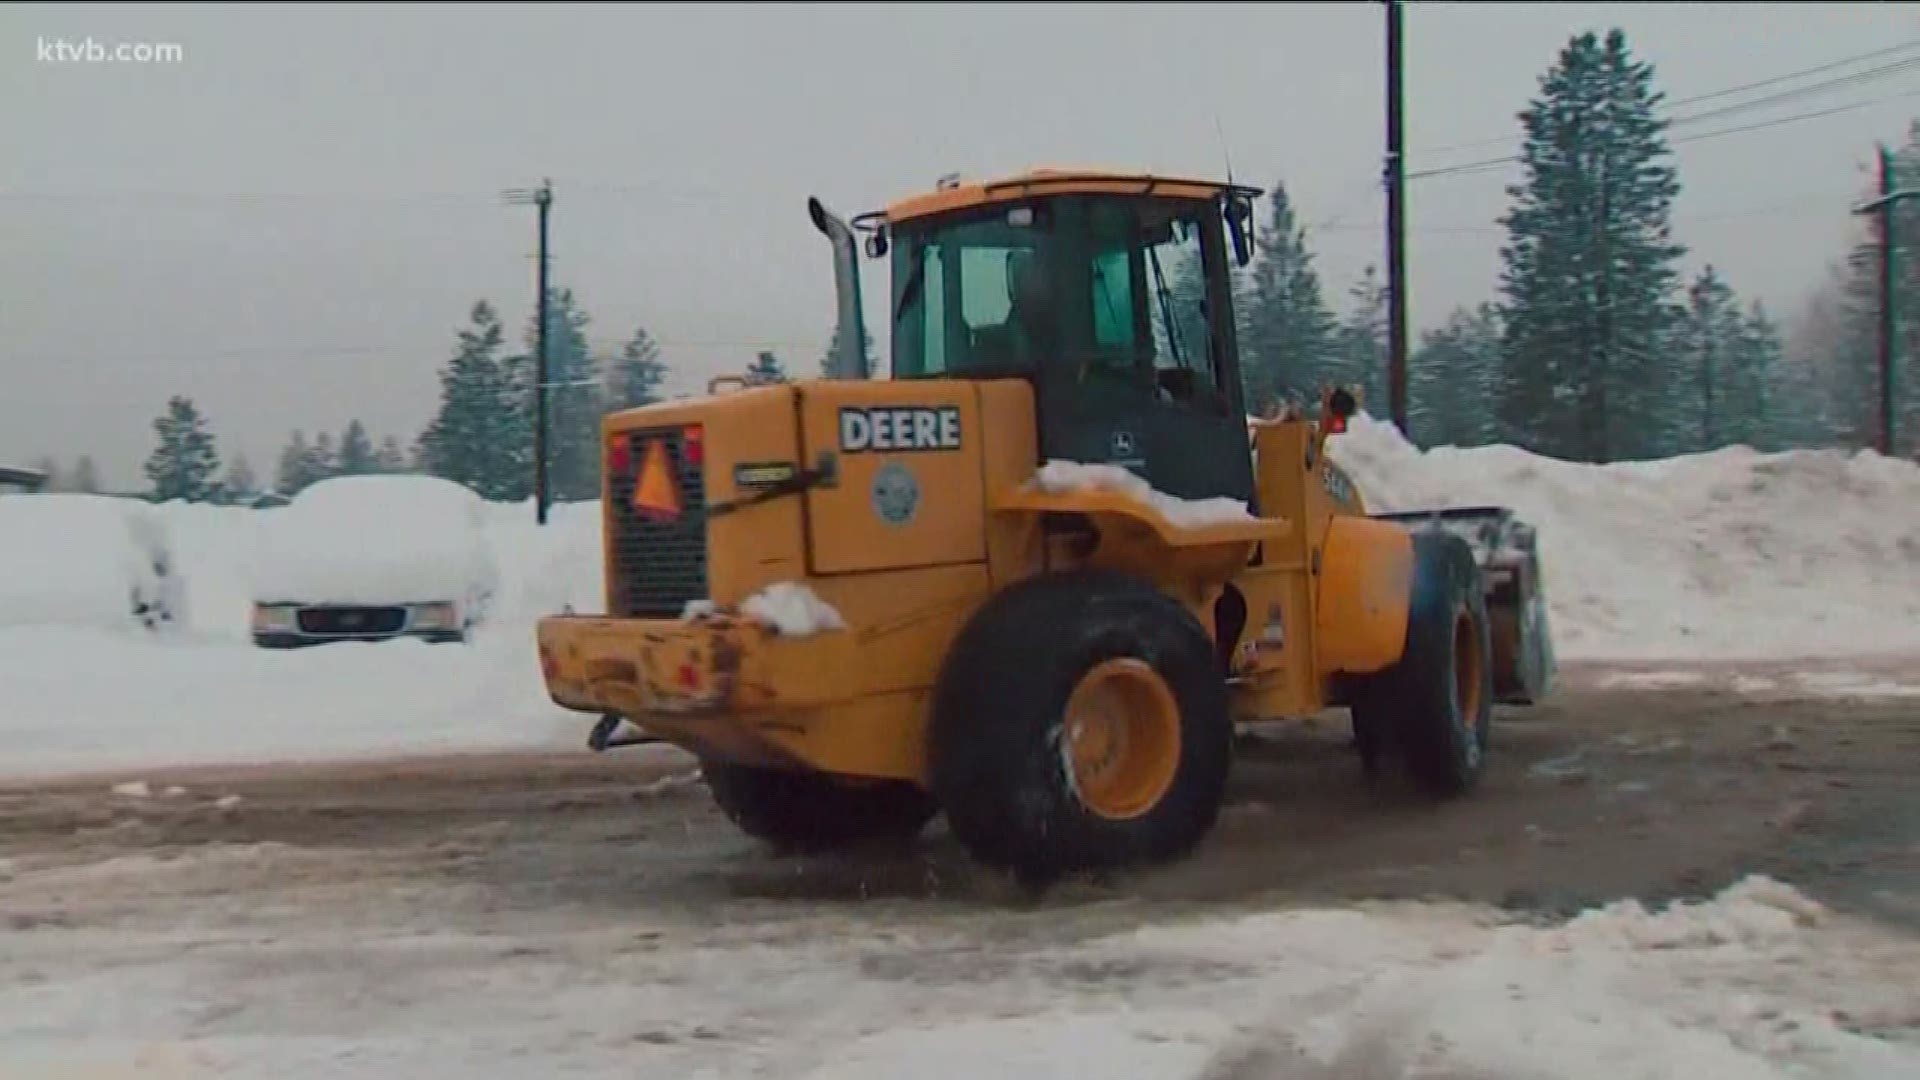 KTVB sent a crew to the mountain town to see how people there are coping with all the snow.